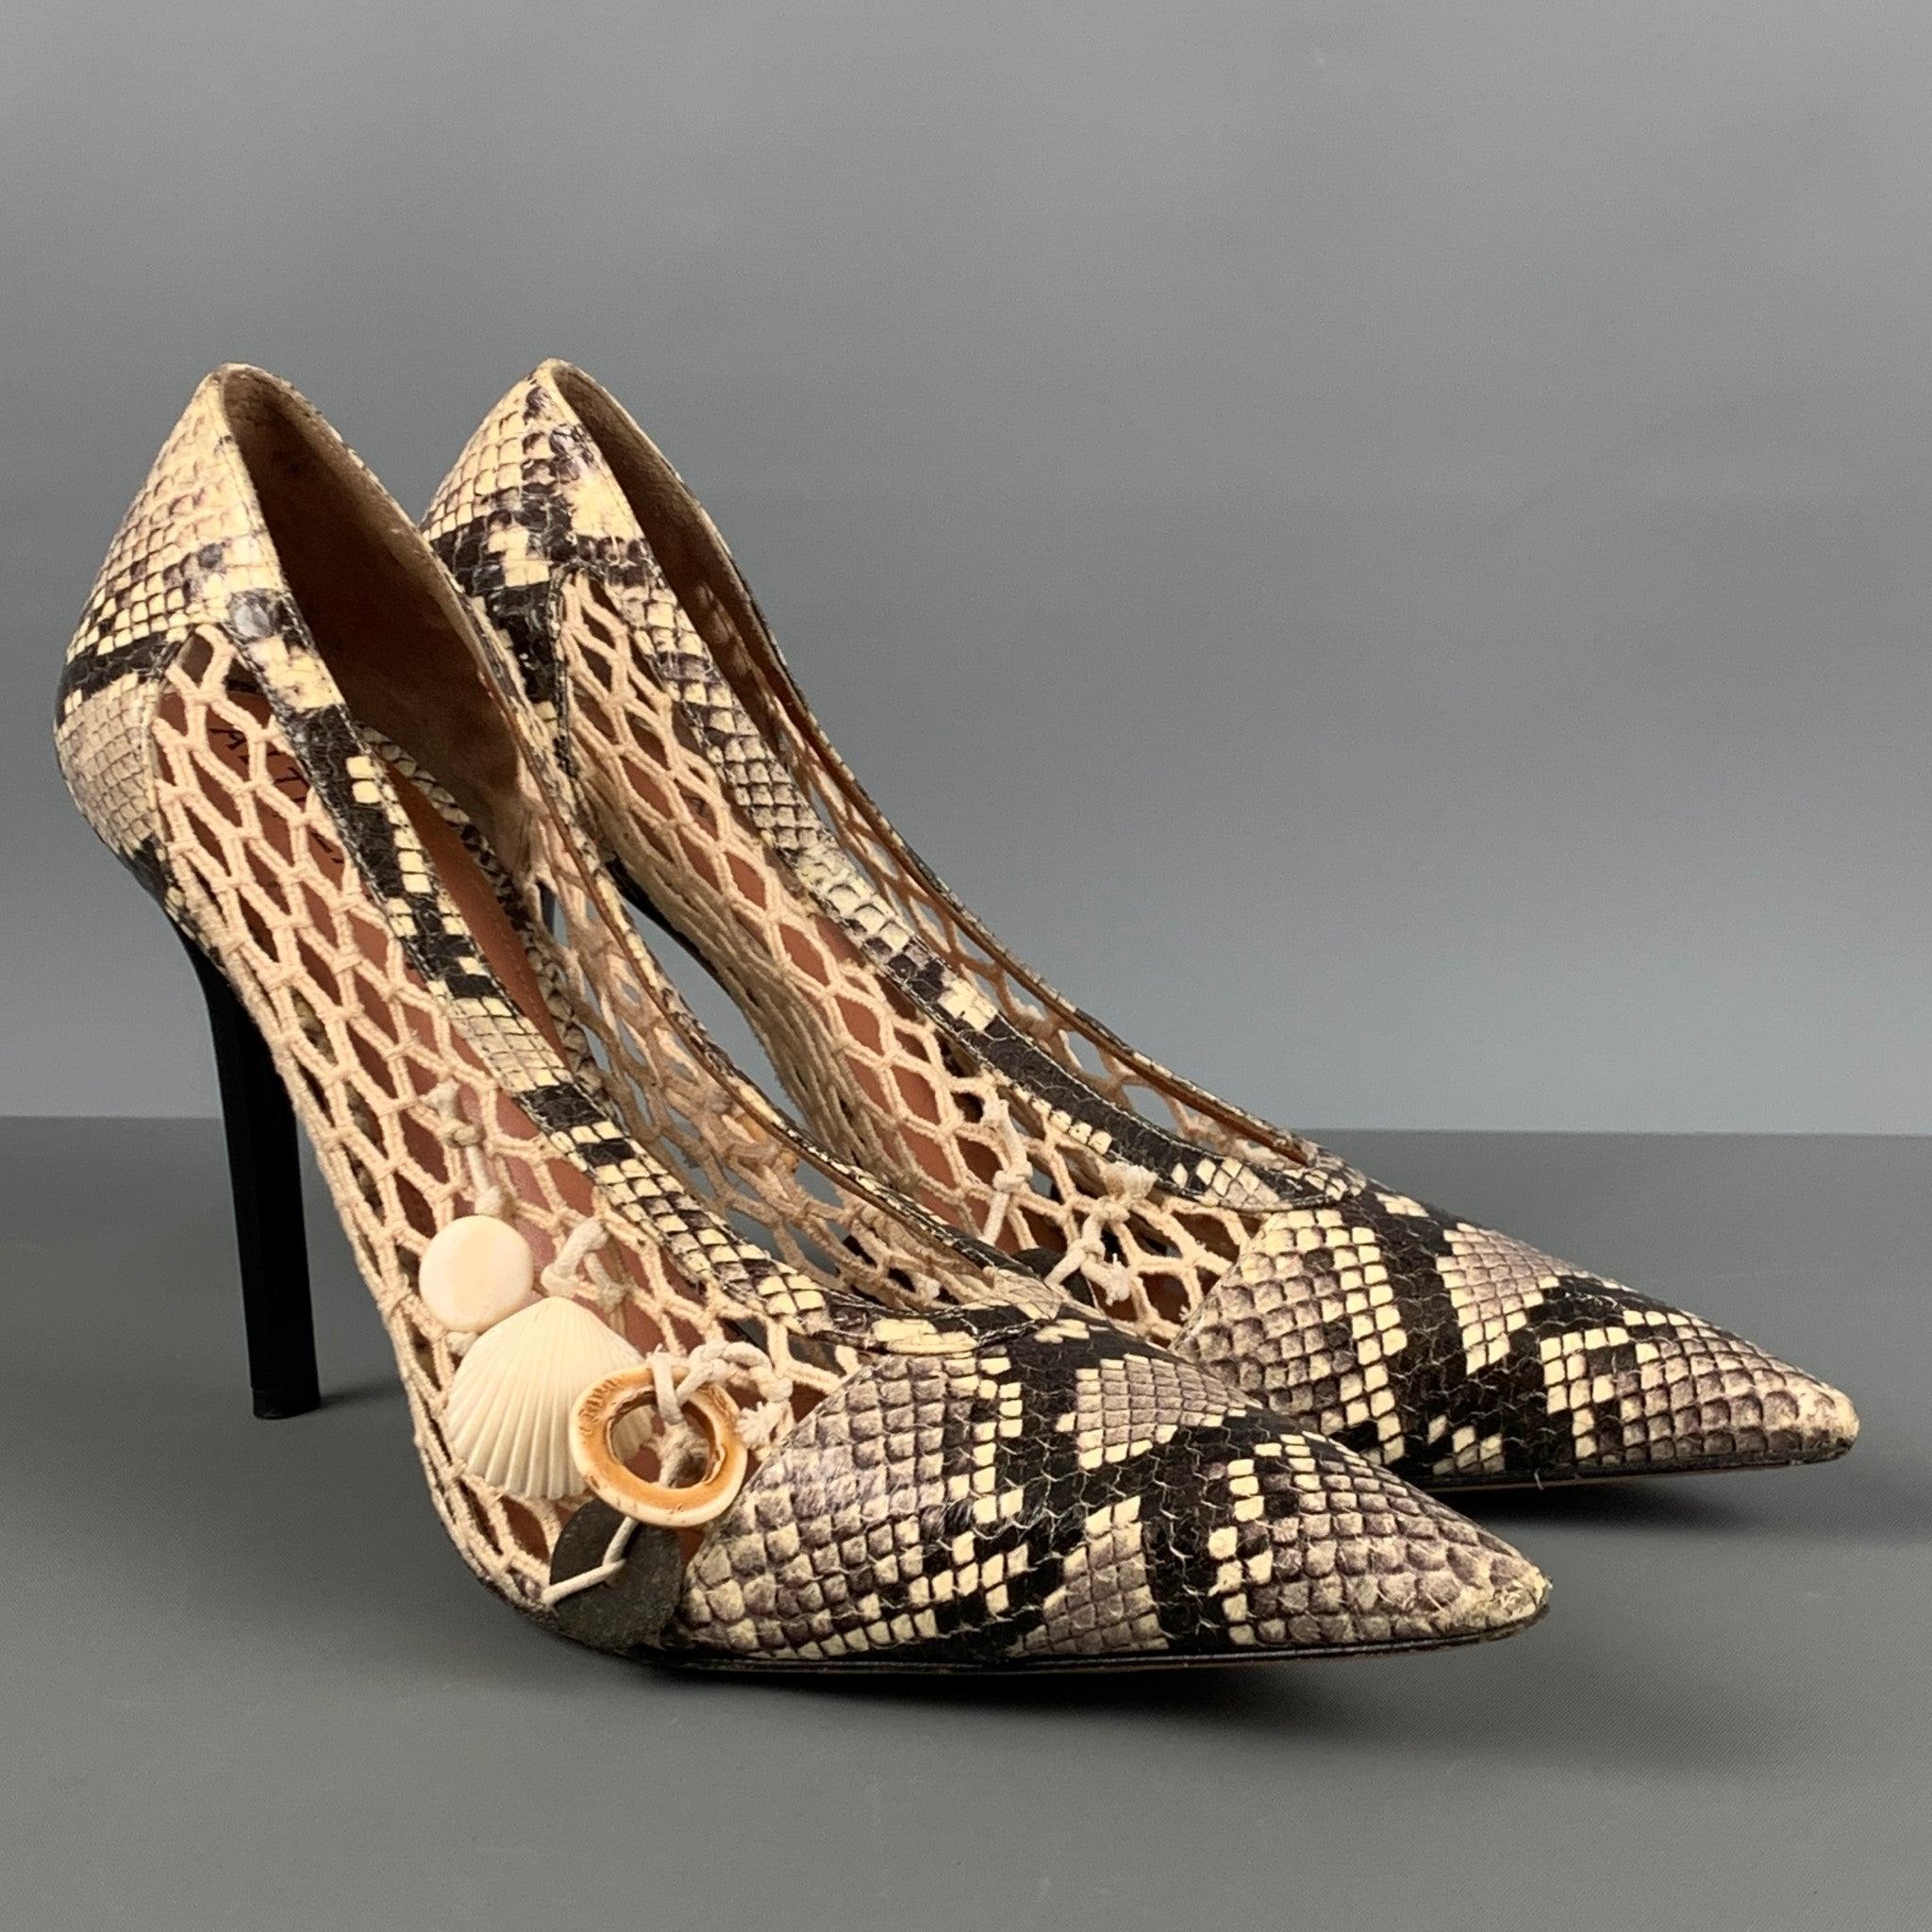 ALTUZARRA pumps comes in a beige and grey snake skin featuring a beige mesh detail, sea shells, pointed toe, and a stiletto heel. Made in Italy. Very Good Pre-Owned Condition. 

Marked:   41 

Measurements: 
  Heel: 4.5 inches   
  
  
 
Reference: